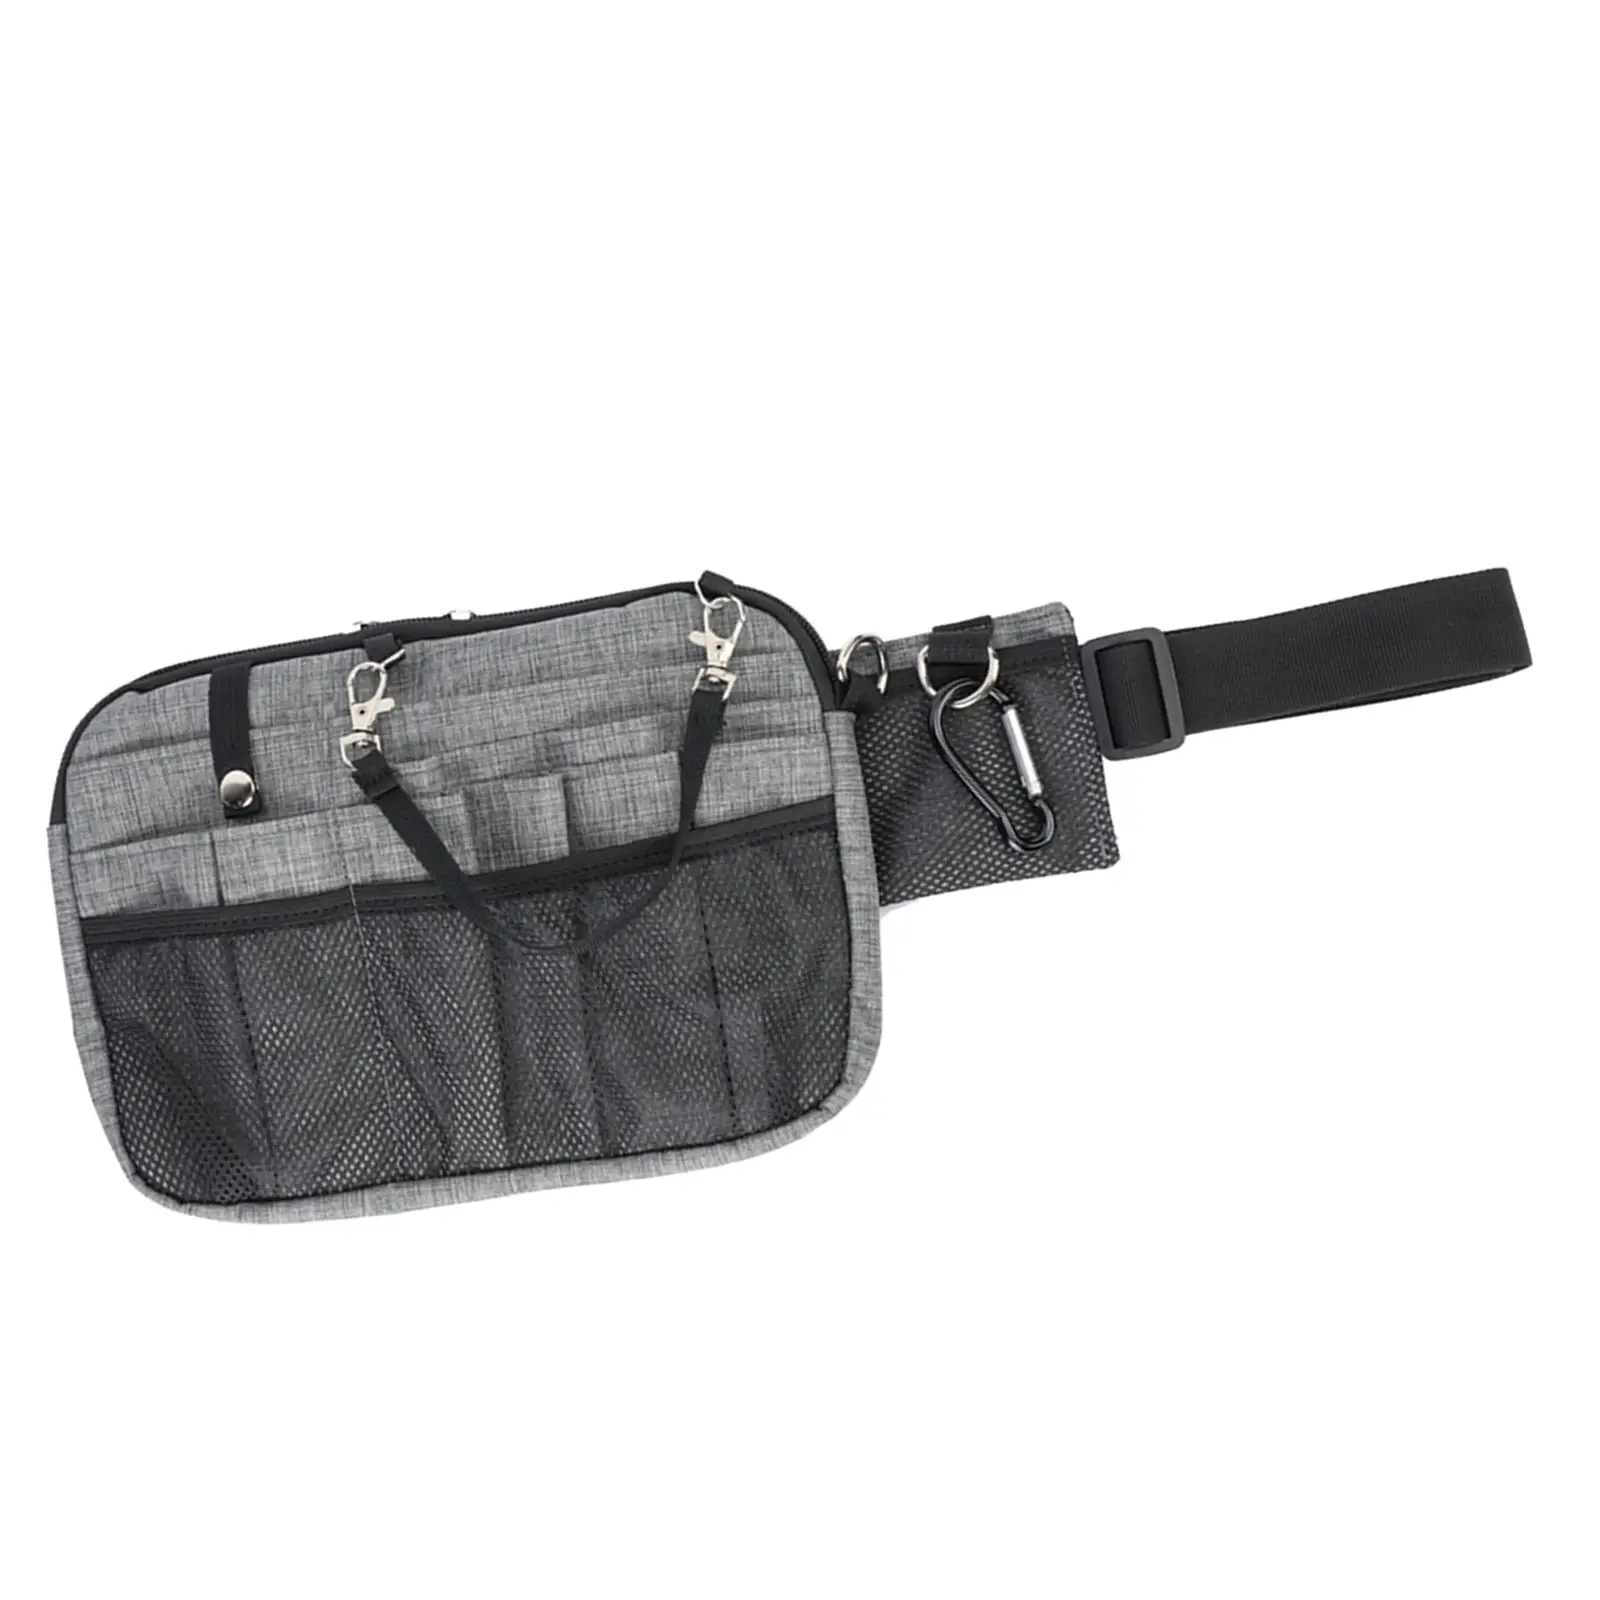 Nurse Fanny Pack Multi Compartments Nurse Tool Belt with Tape Holder Pouch